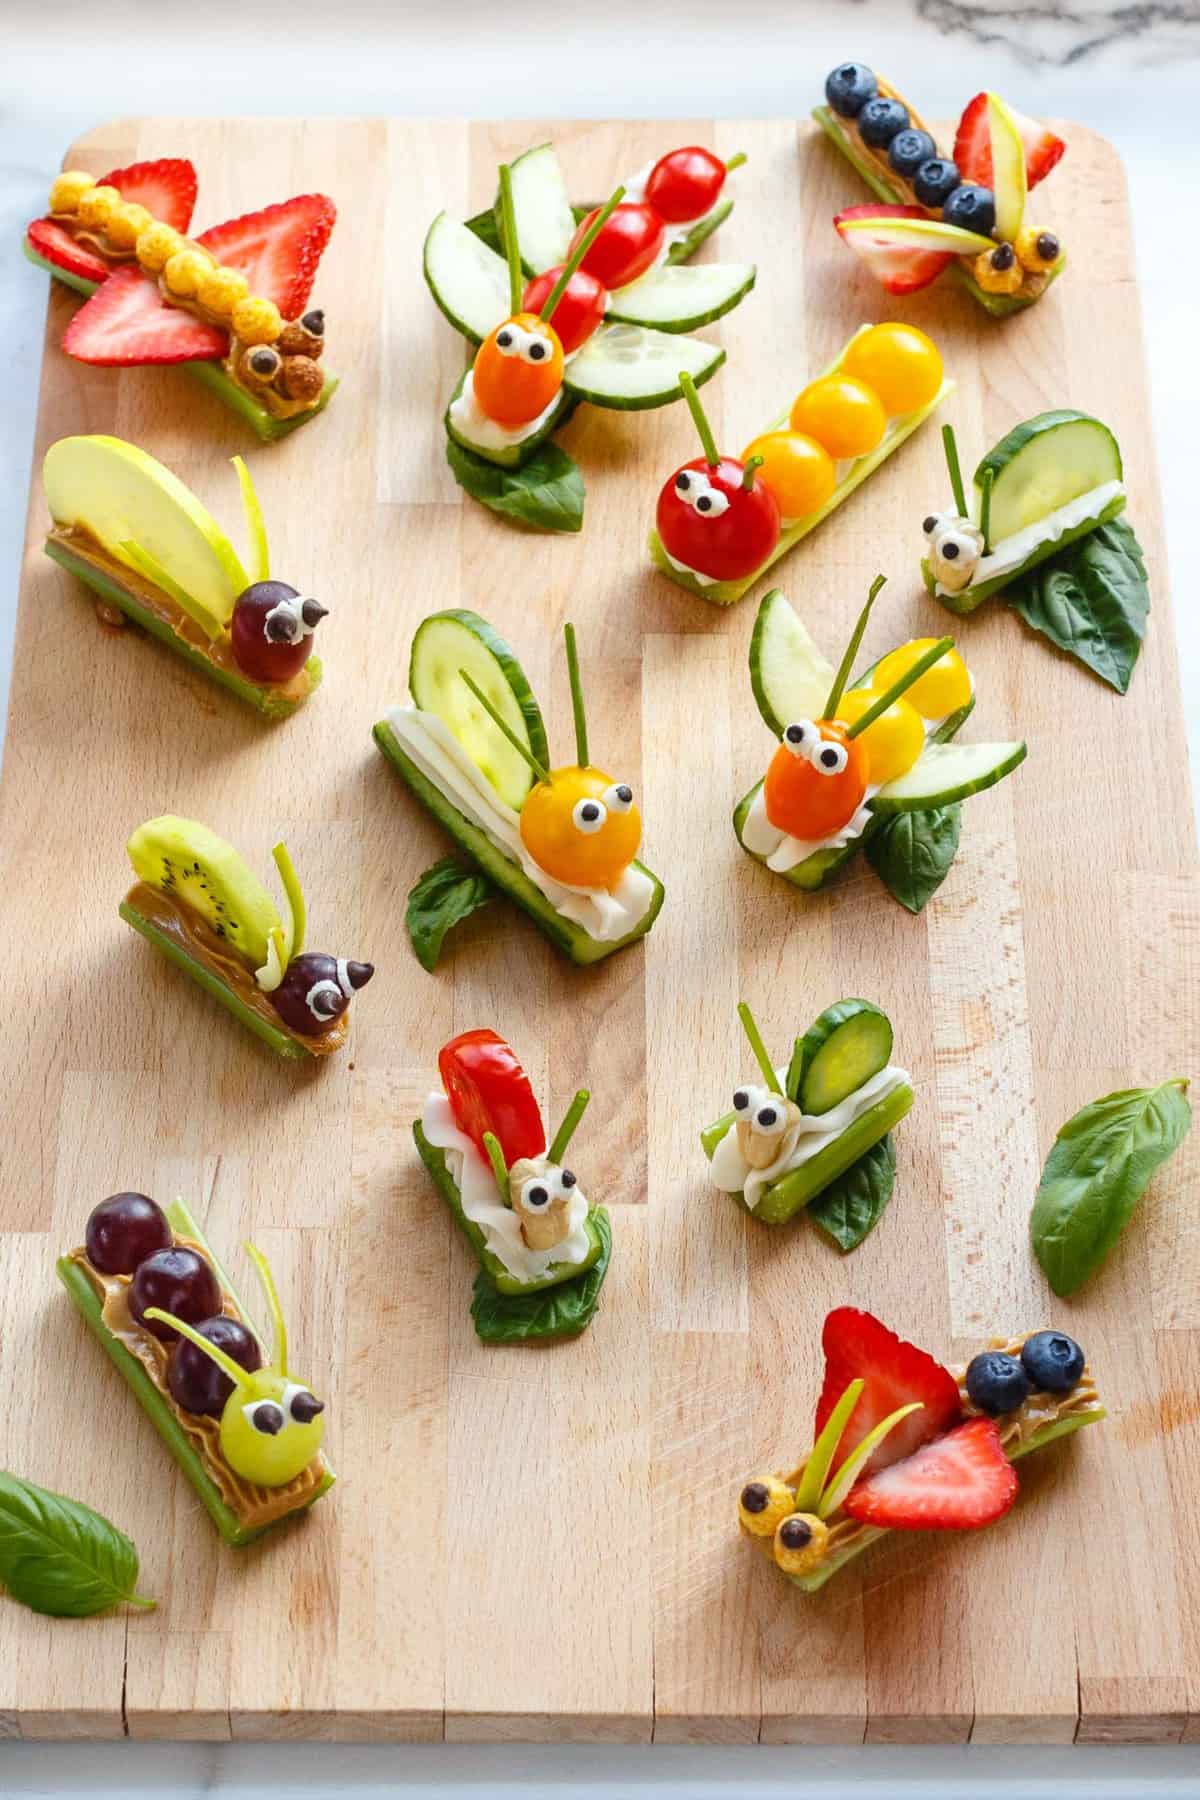 Fruit and vegetable bug snacks arranged on a wood board.